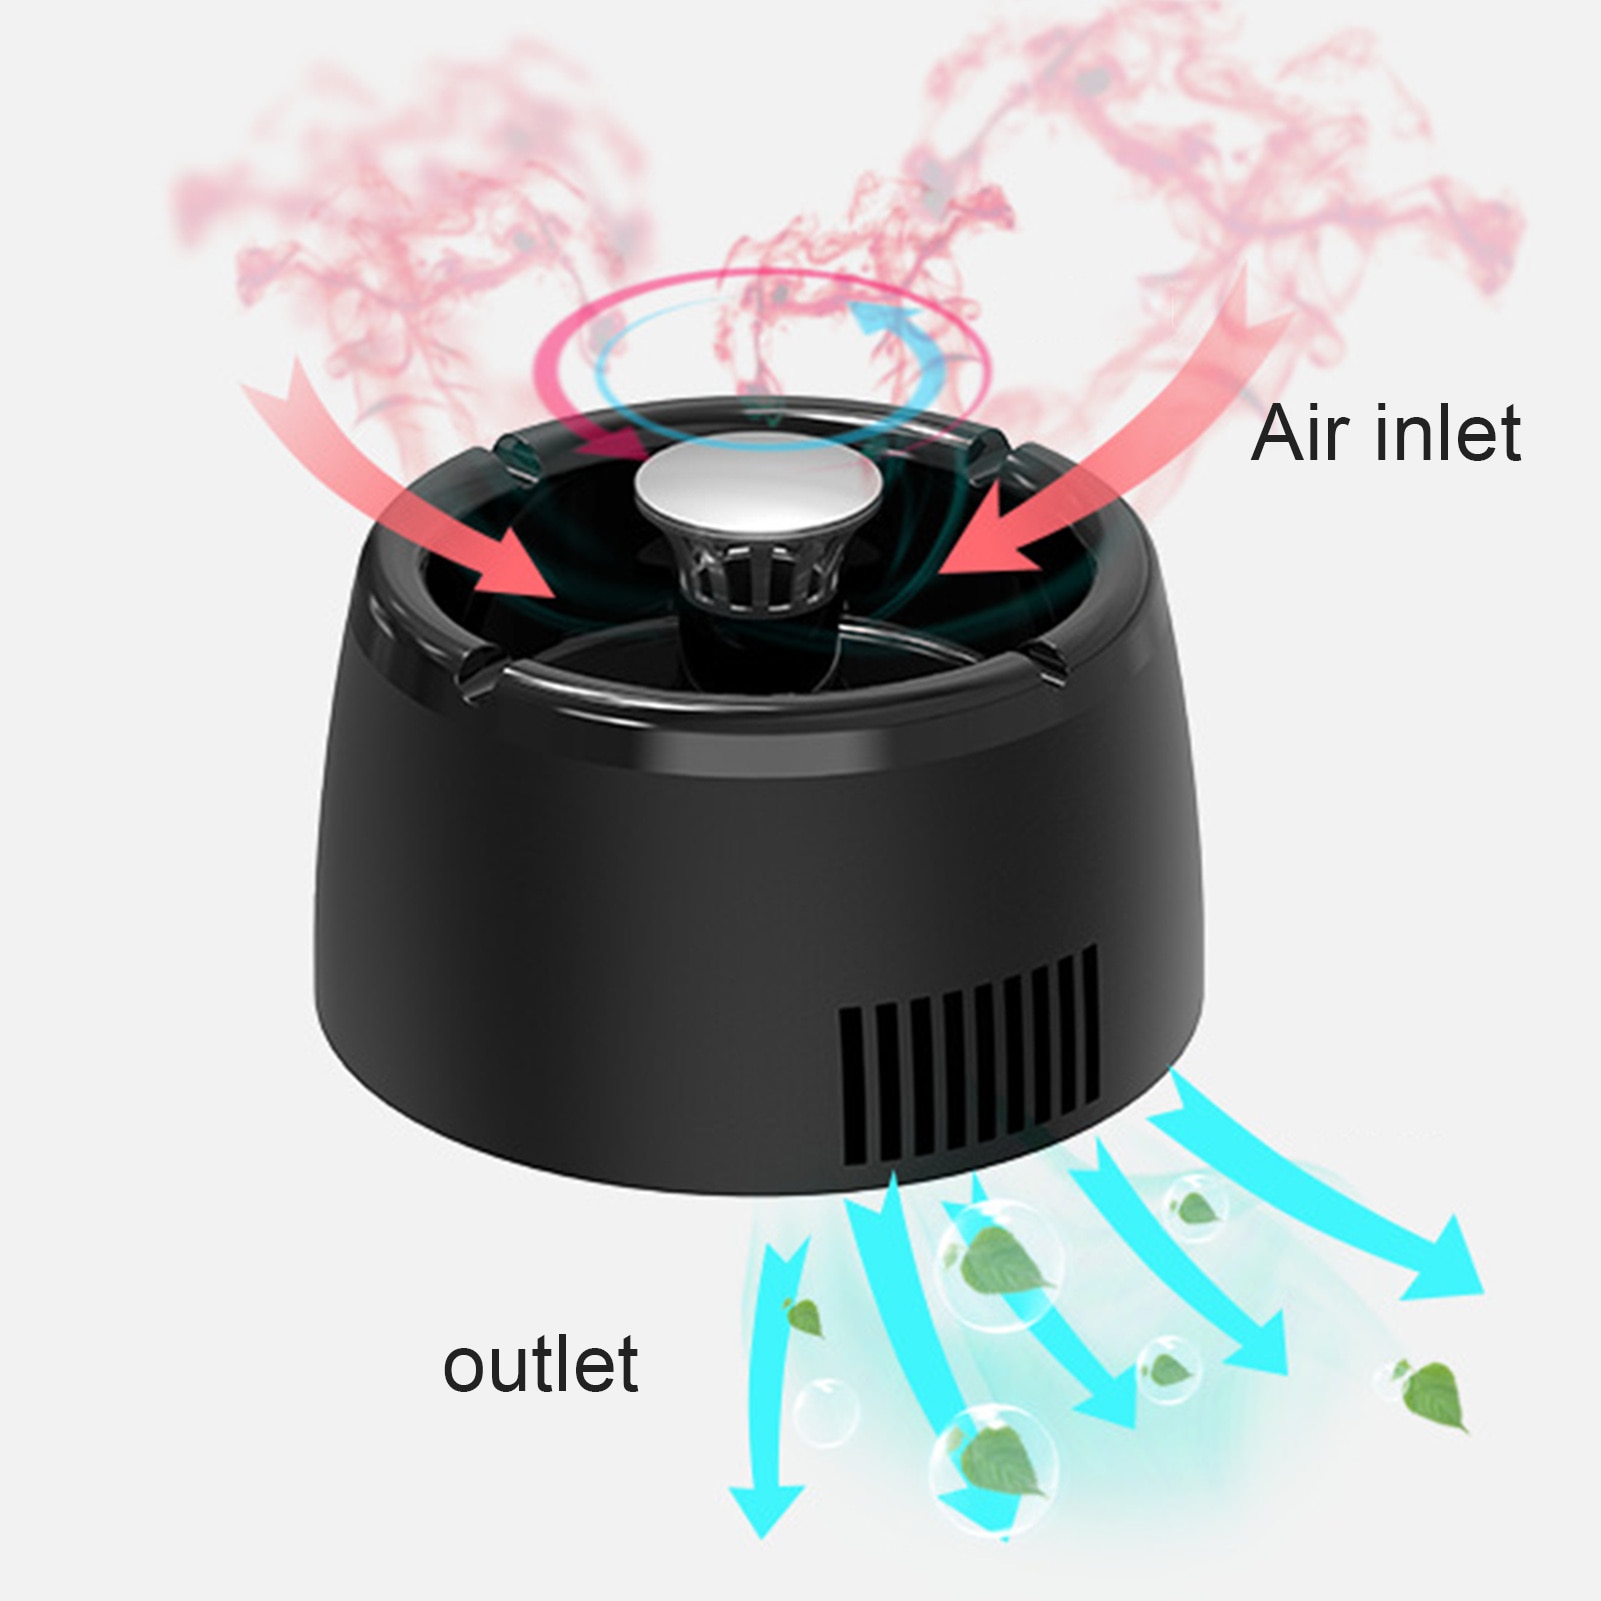 Multifunctional Smokeless Anion Ashtray Portable Indoor Negative Ion Air Purifier